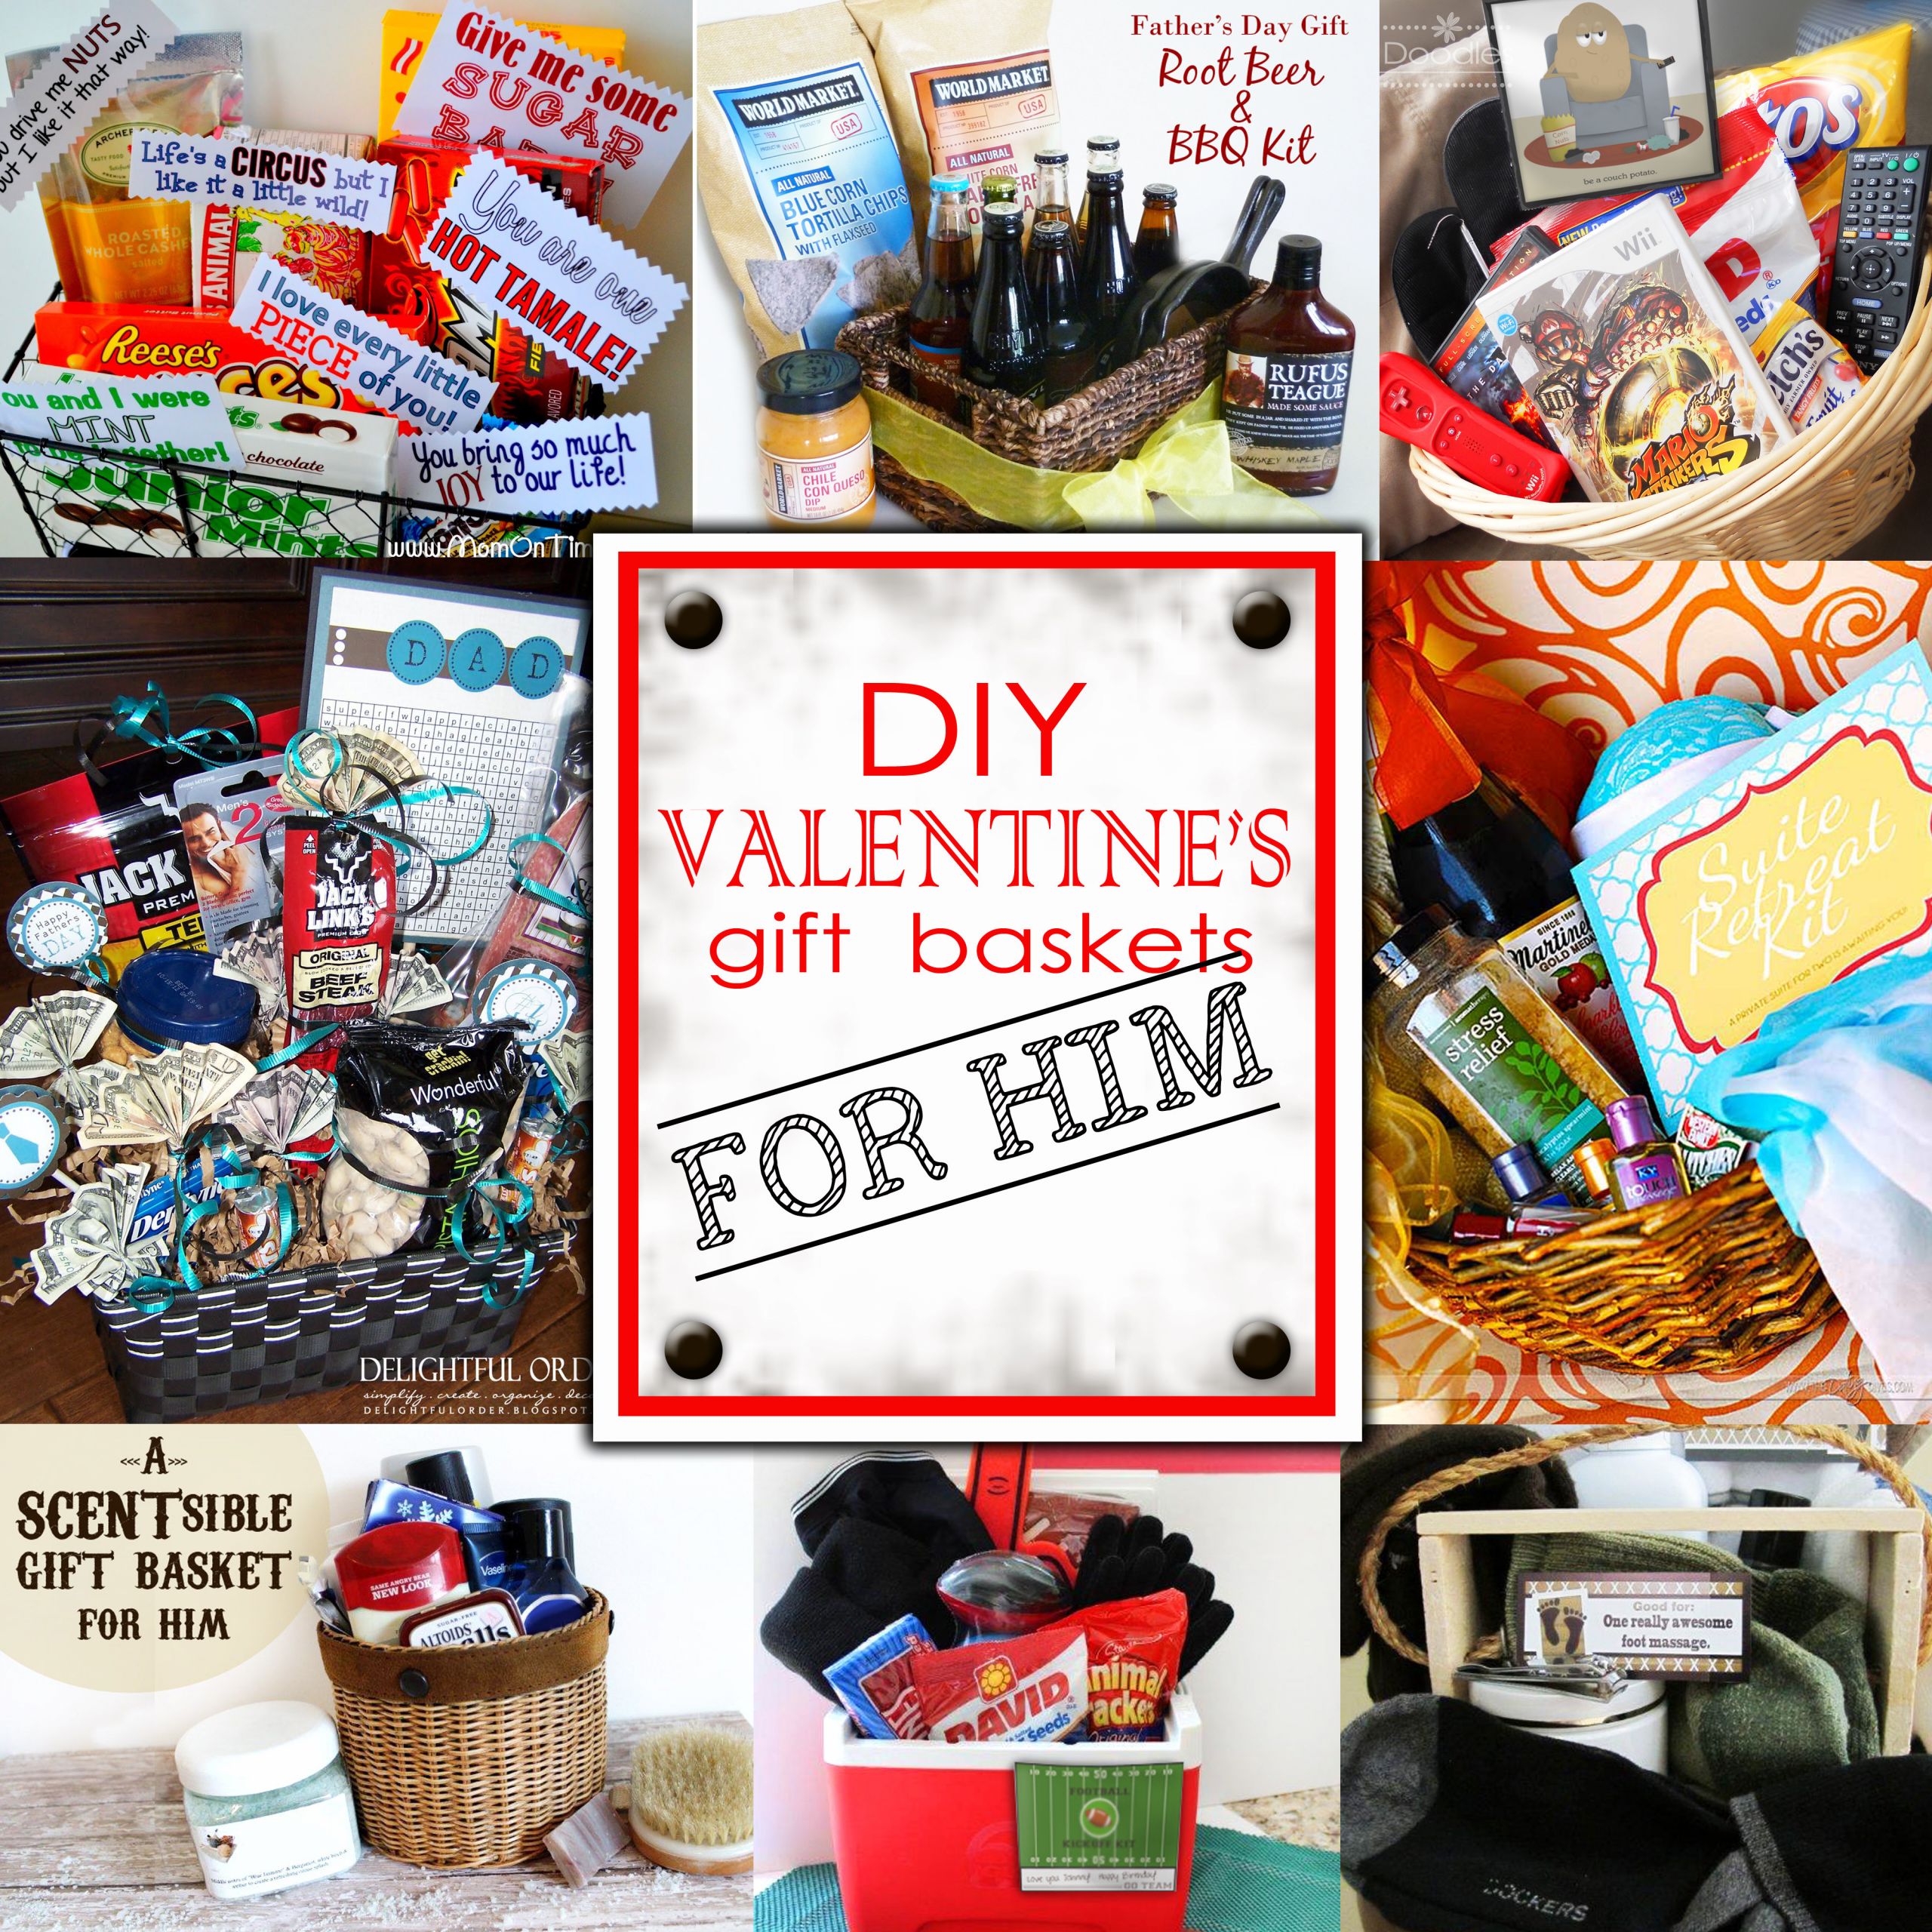 Diy Valentines Day Gifts for Him Awesome Diy Valentine S Day Gift Baskets for Him Darling Doodles